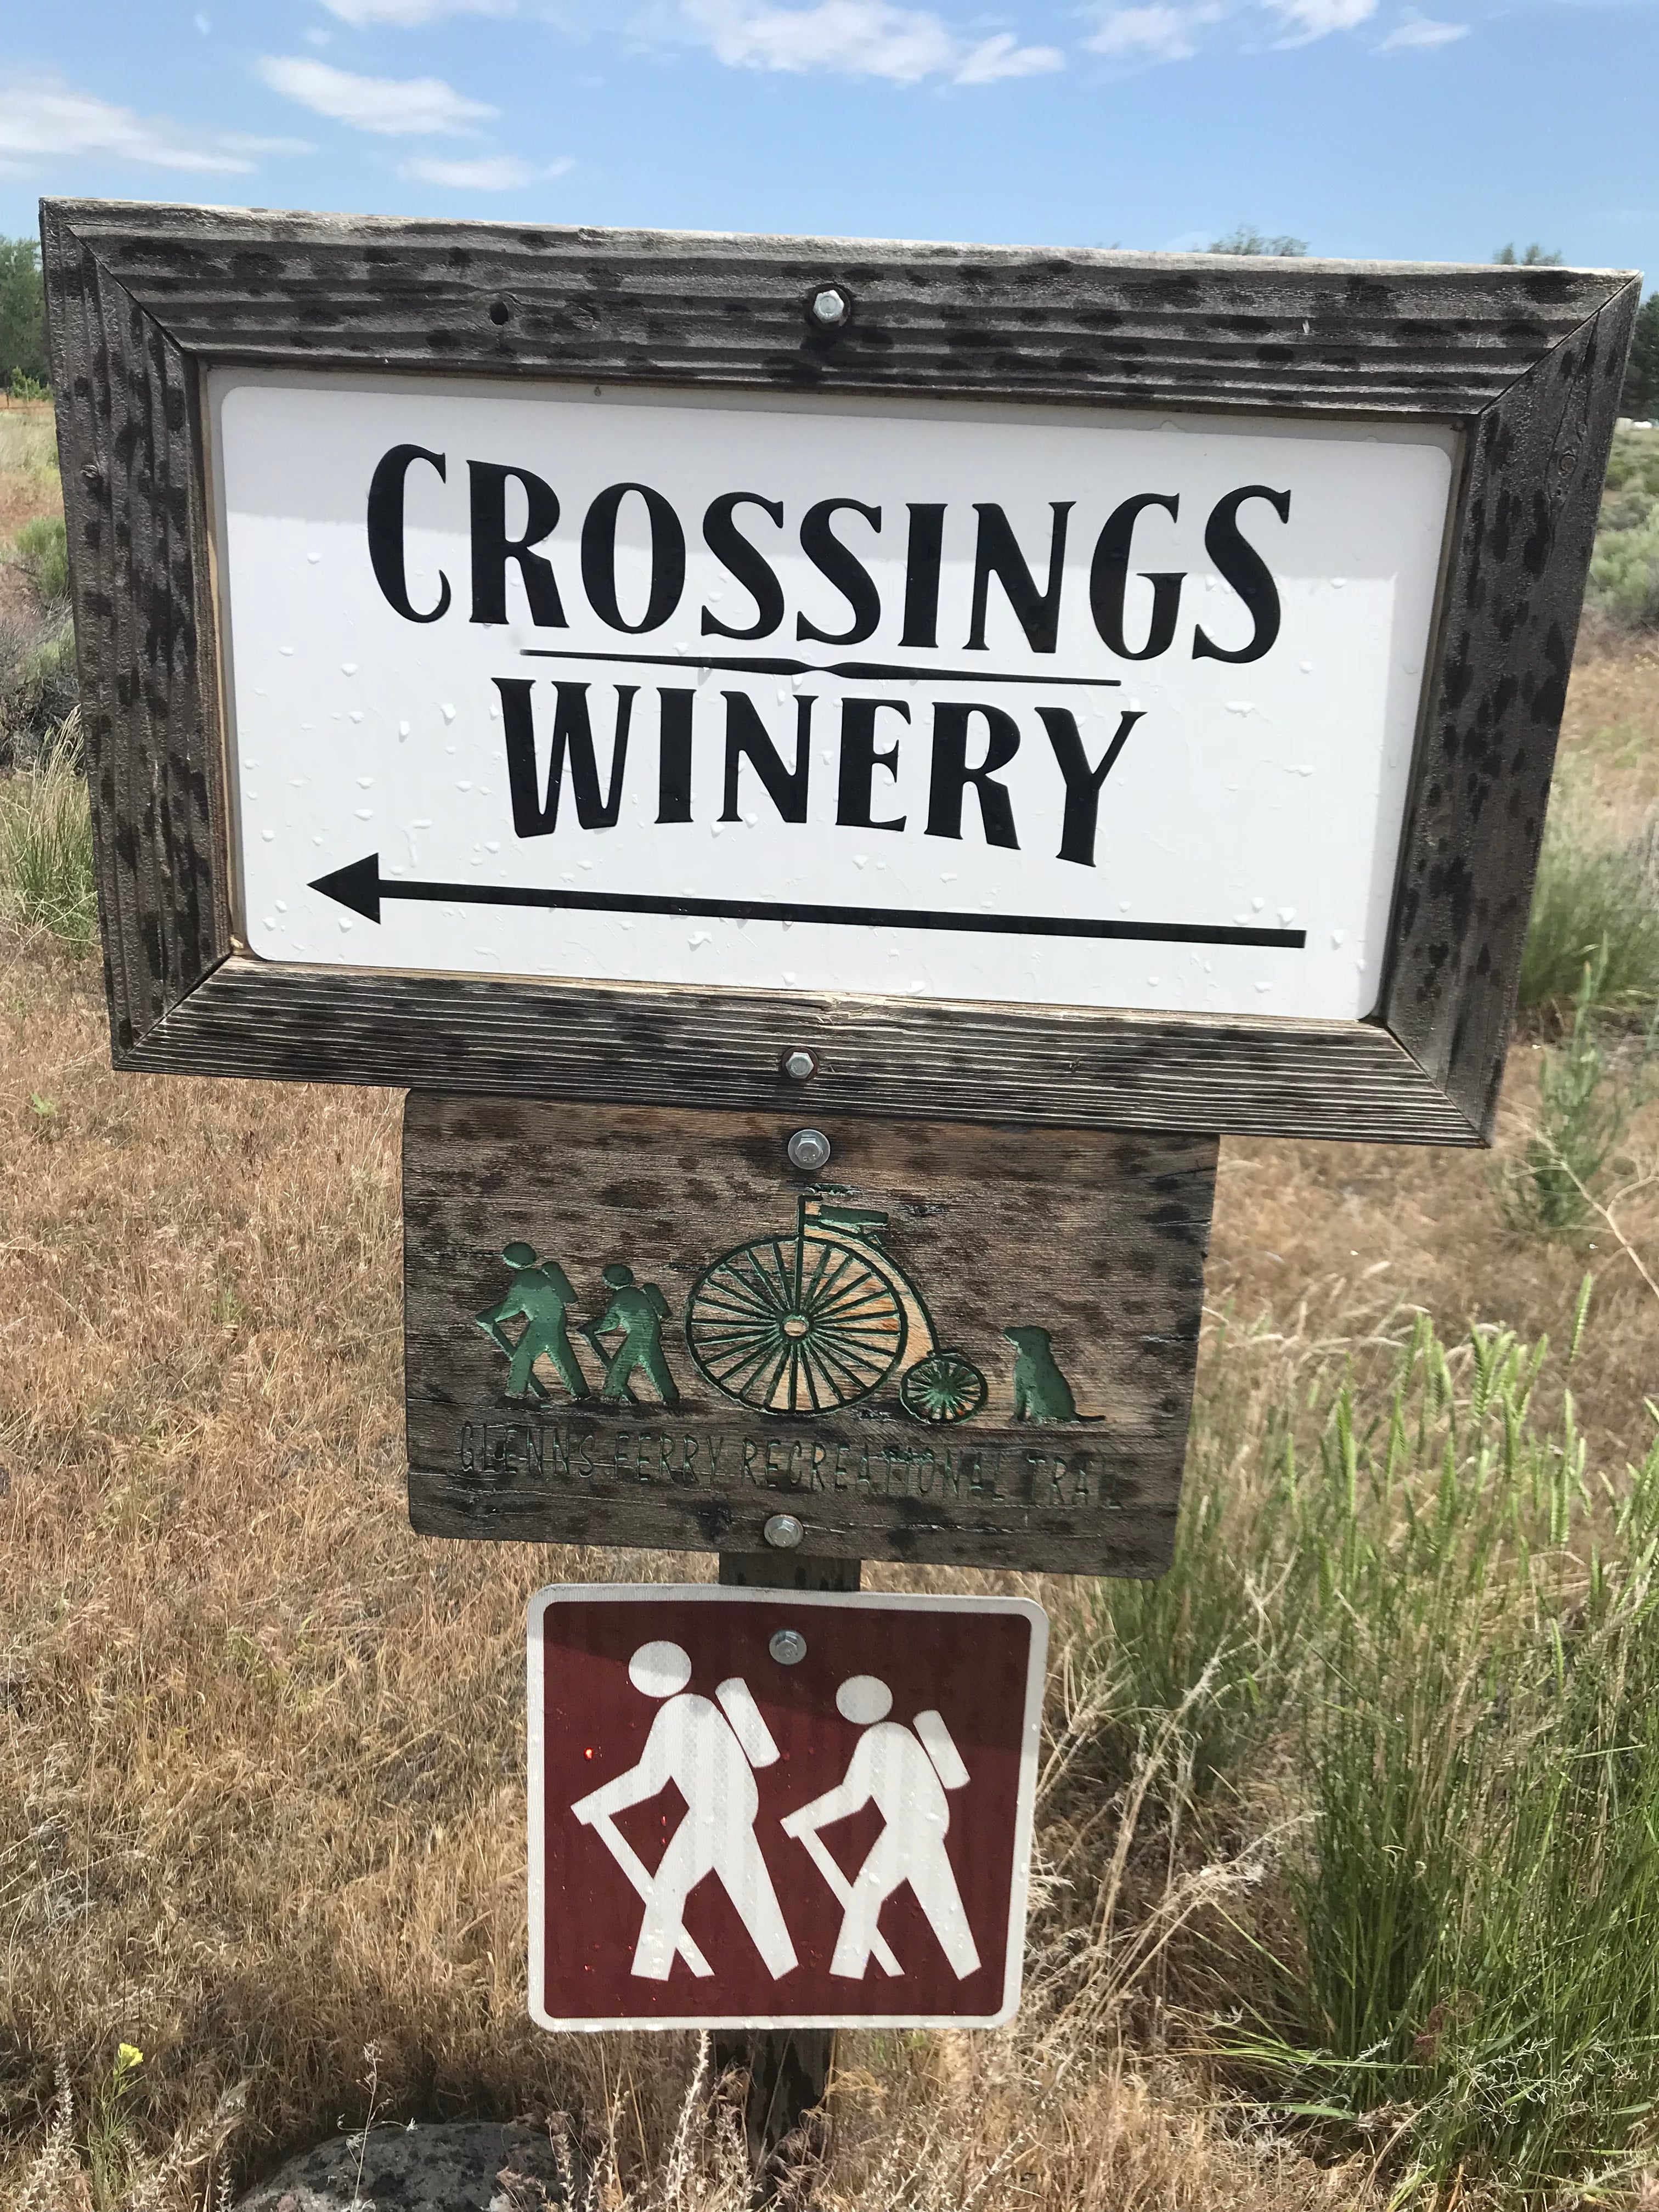 Trial to the winery